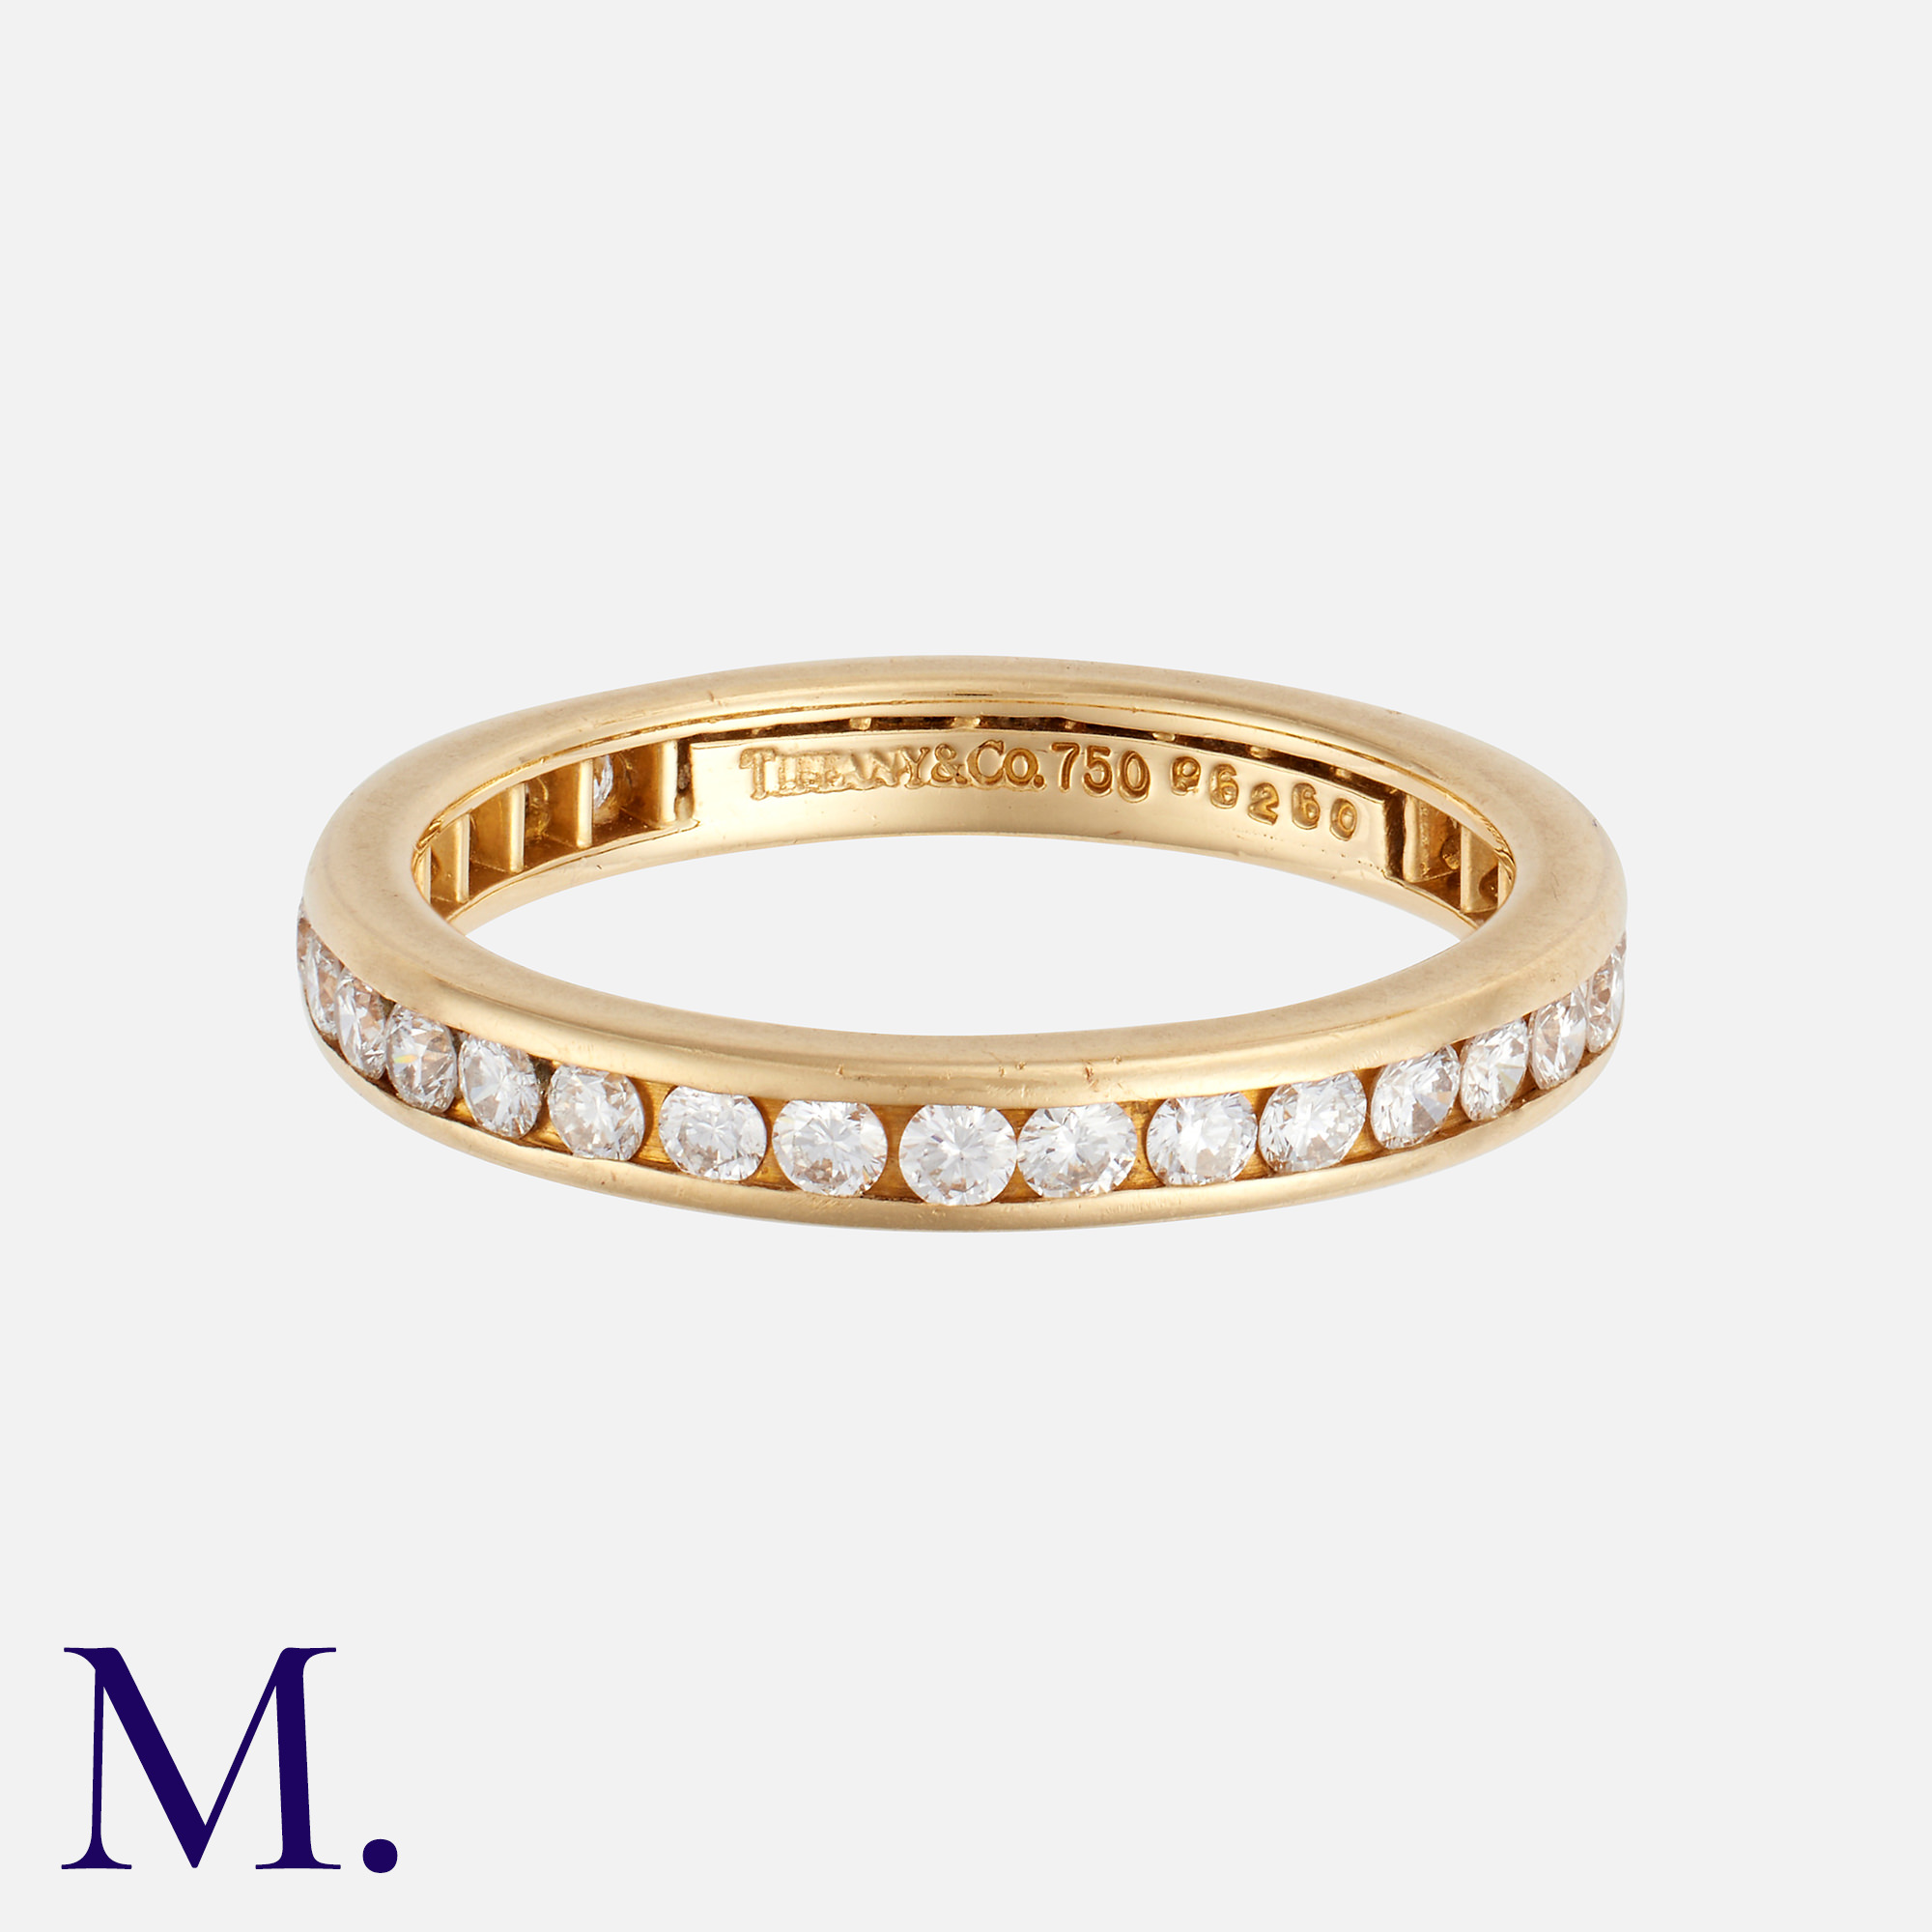 TIFFANY & CO. A Diamond Eternity Ring in 18K yellow gold, set with round brilliant diamonds weighing